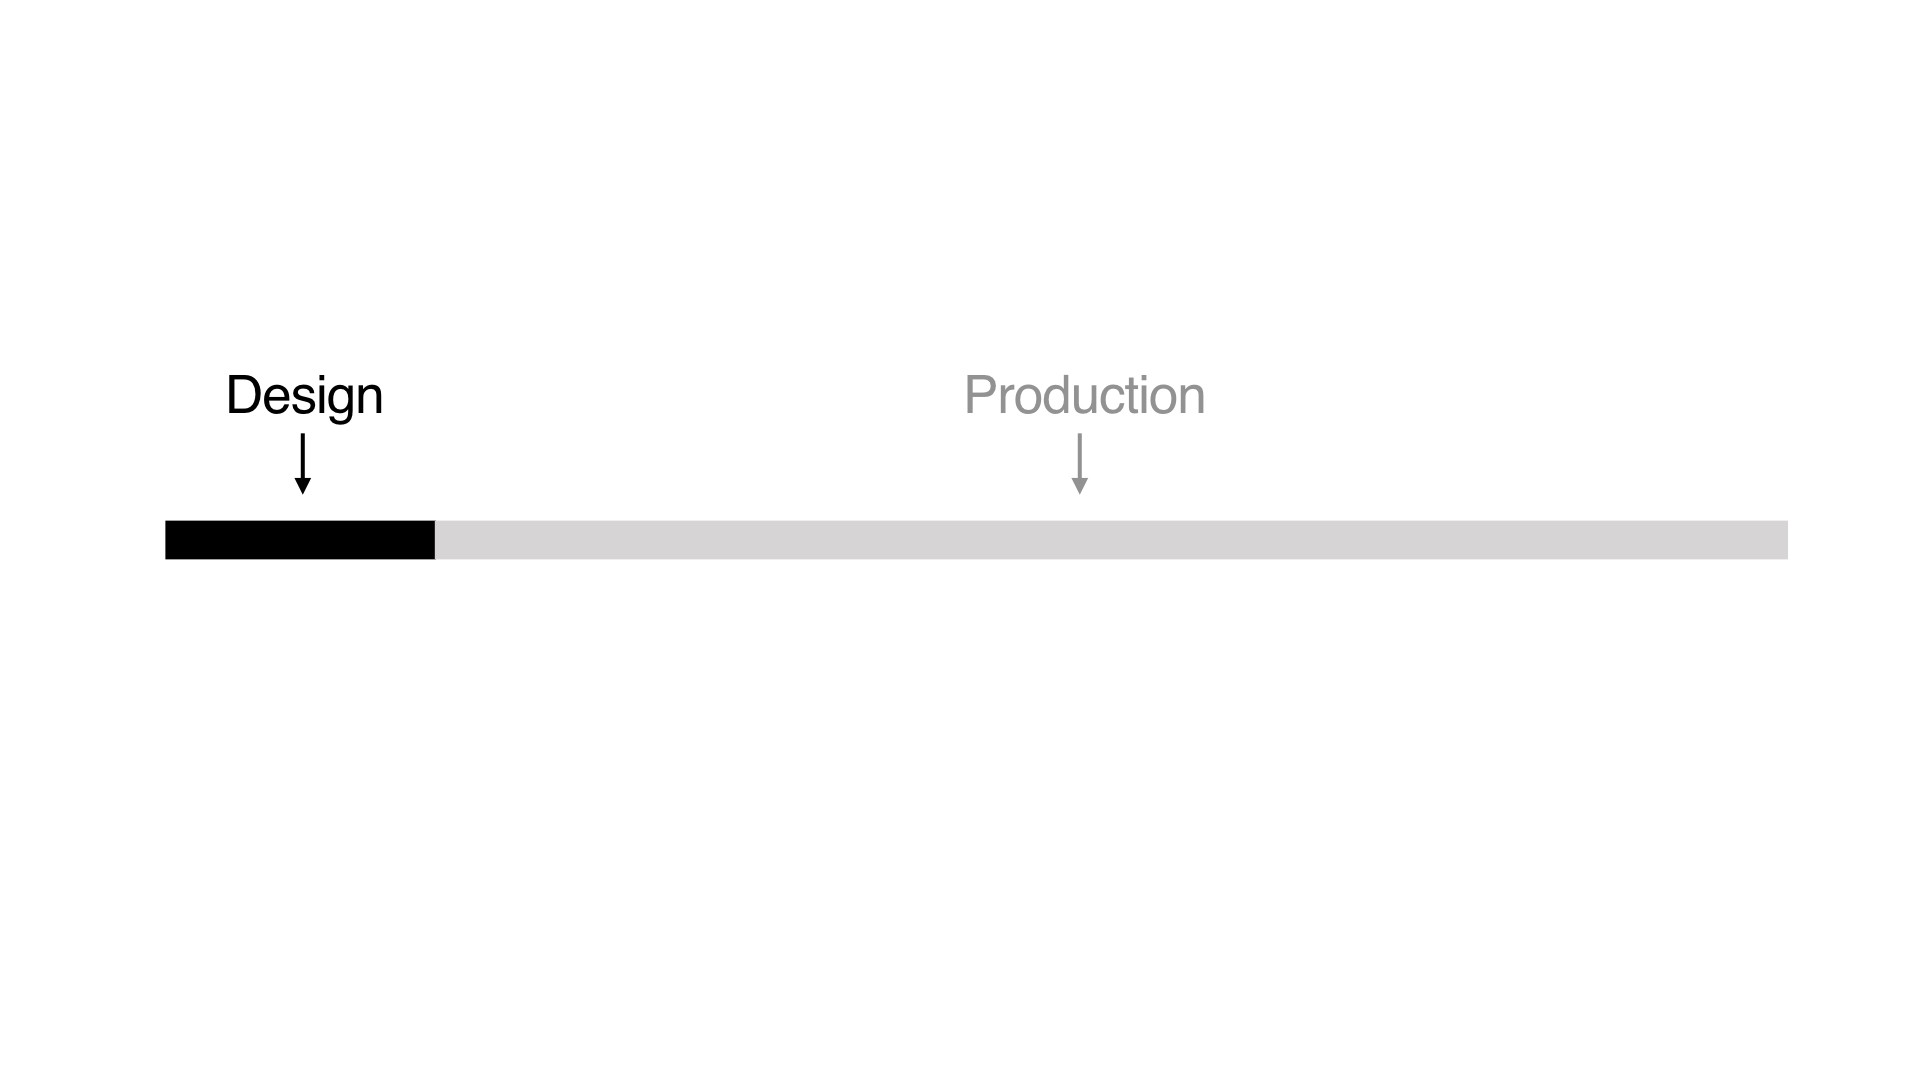 Visual that illustrate design being smaller than production.